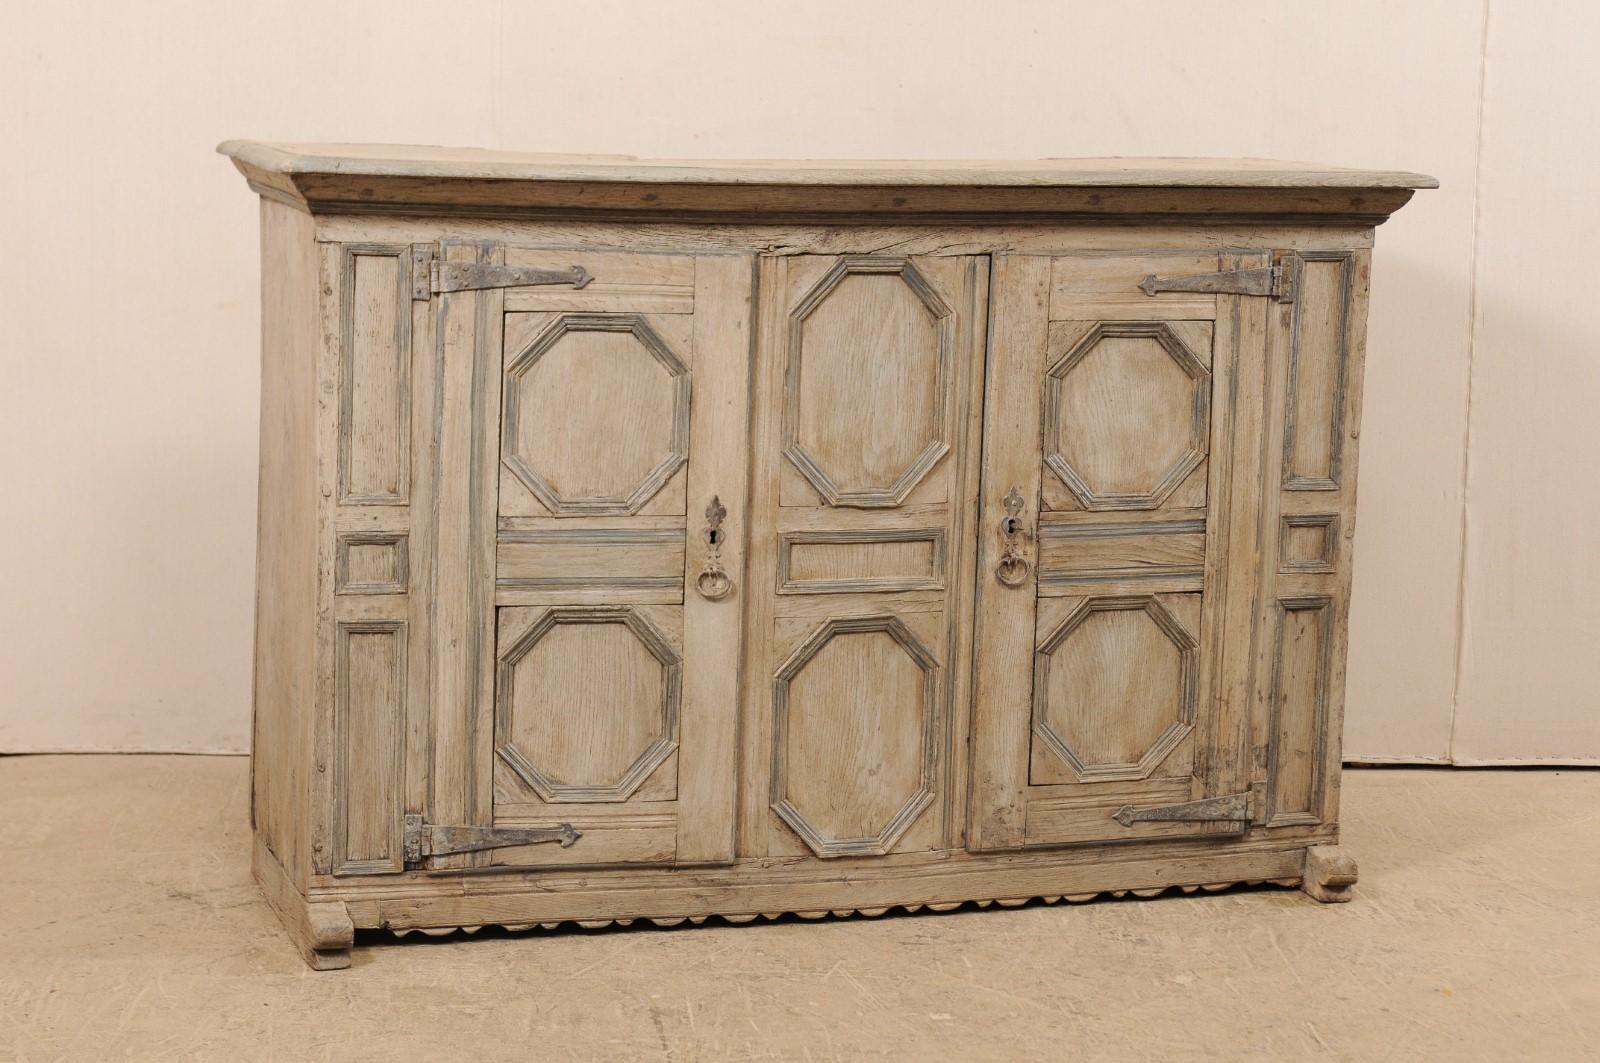 18th Century German Carved and Painted Wood Sideboard Cabinet (Deutsch)